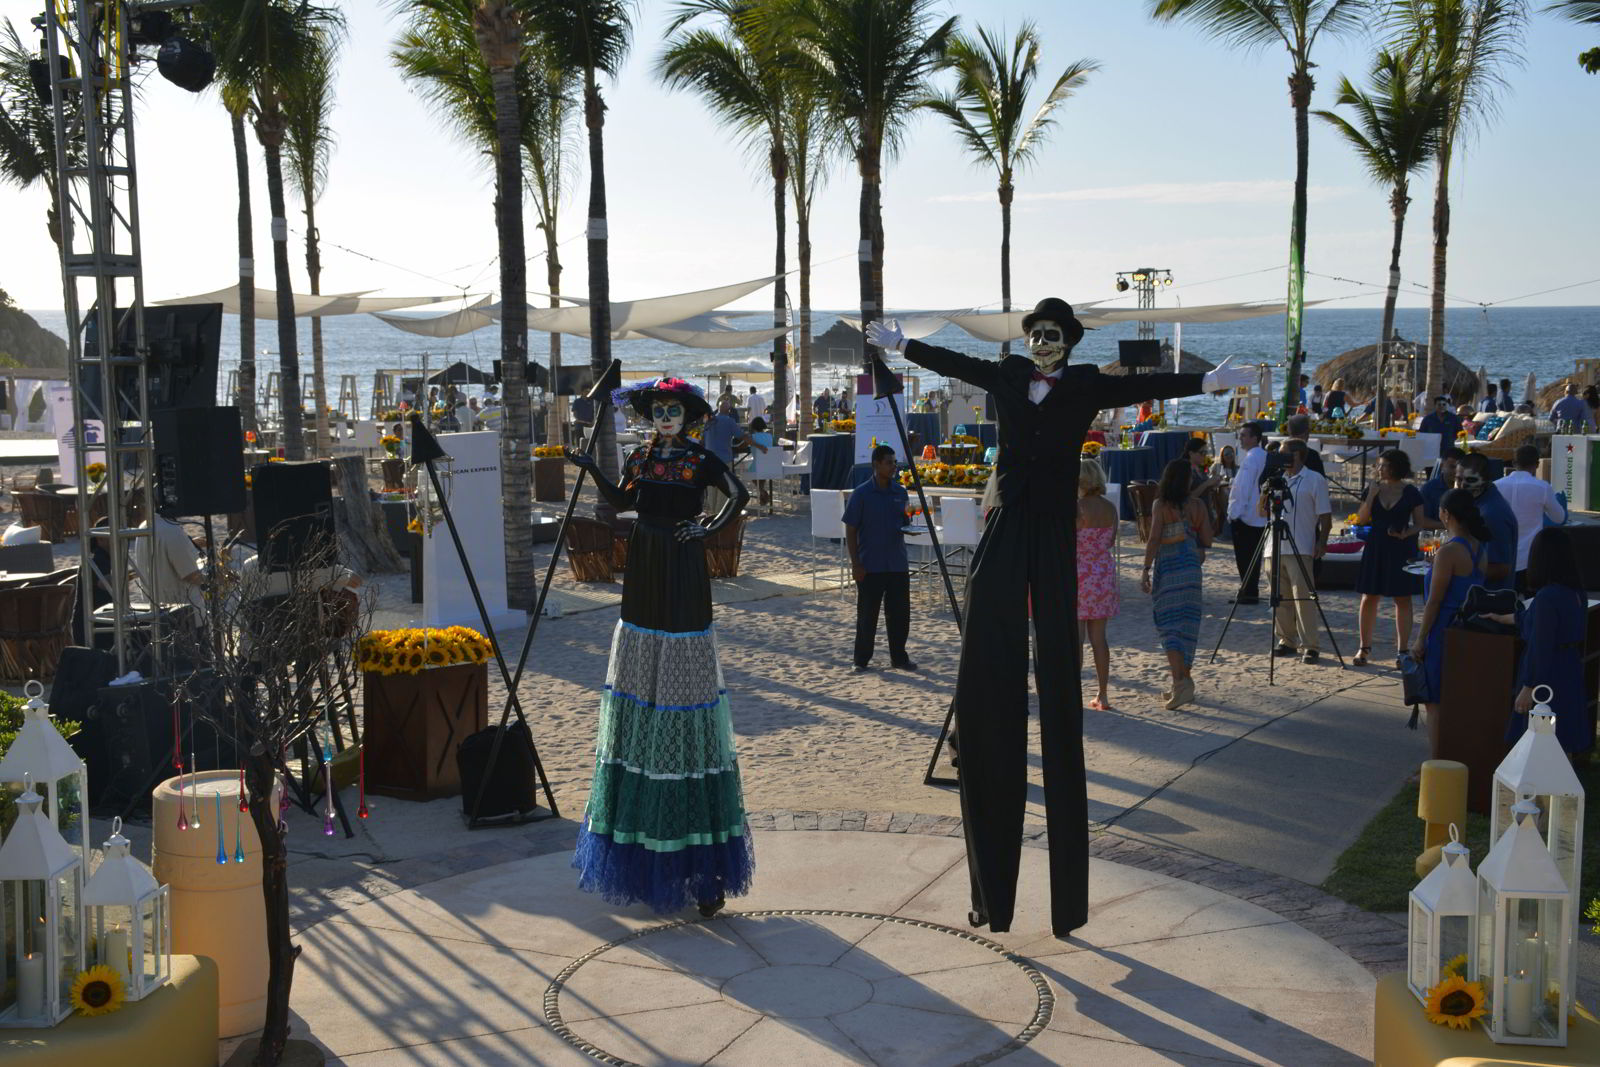 An image of a Day of the Dead party with people dressed in costumes - Day of the Dead Festival -Dia de los Muertos 